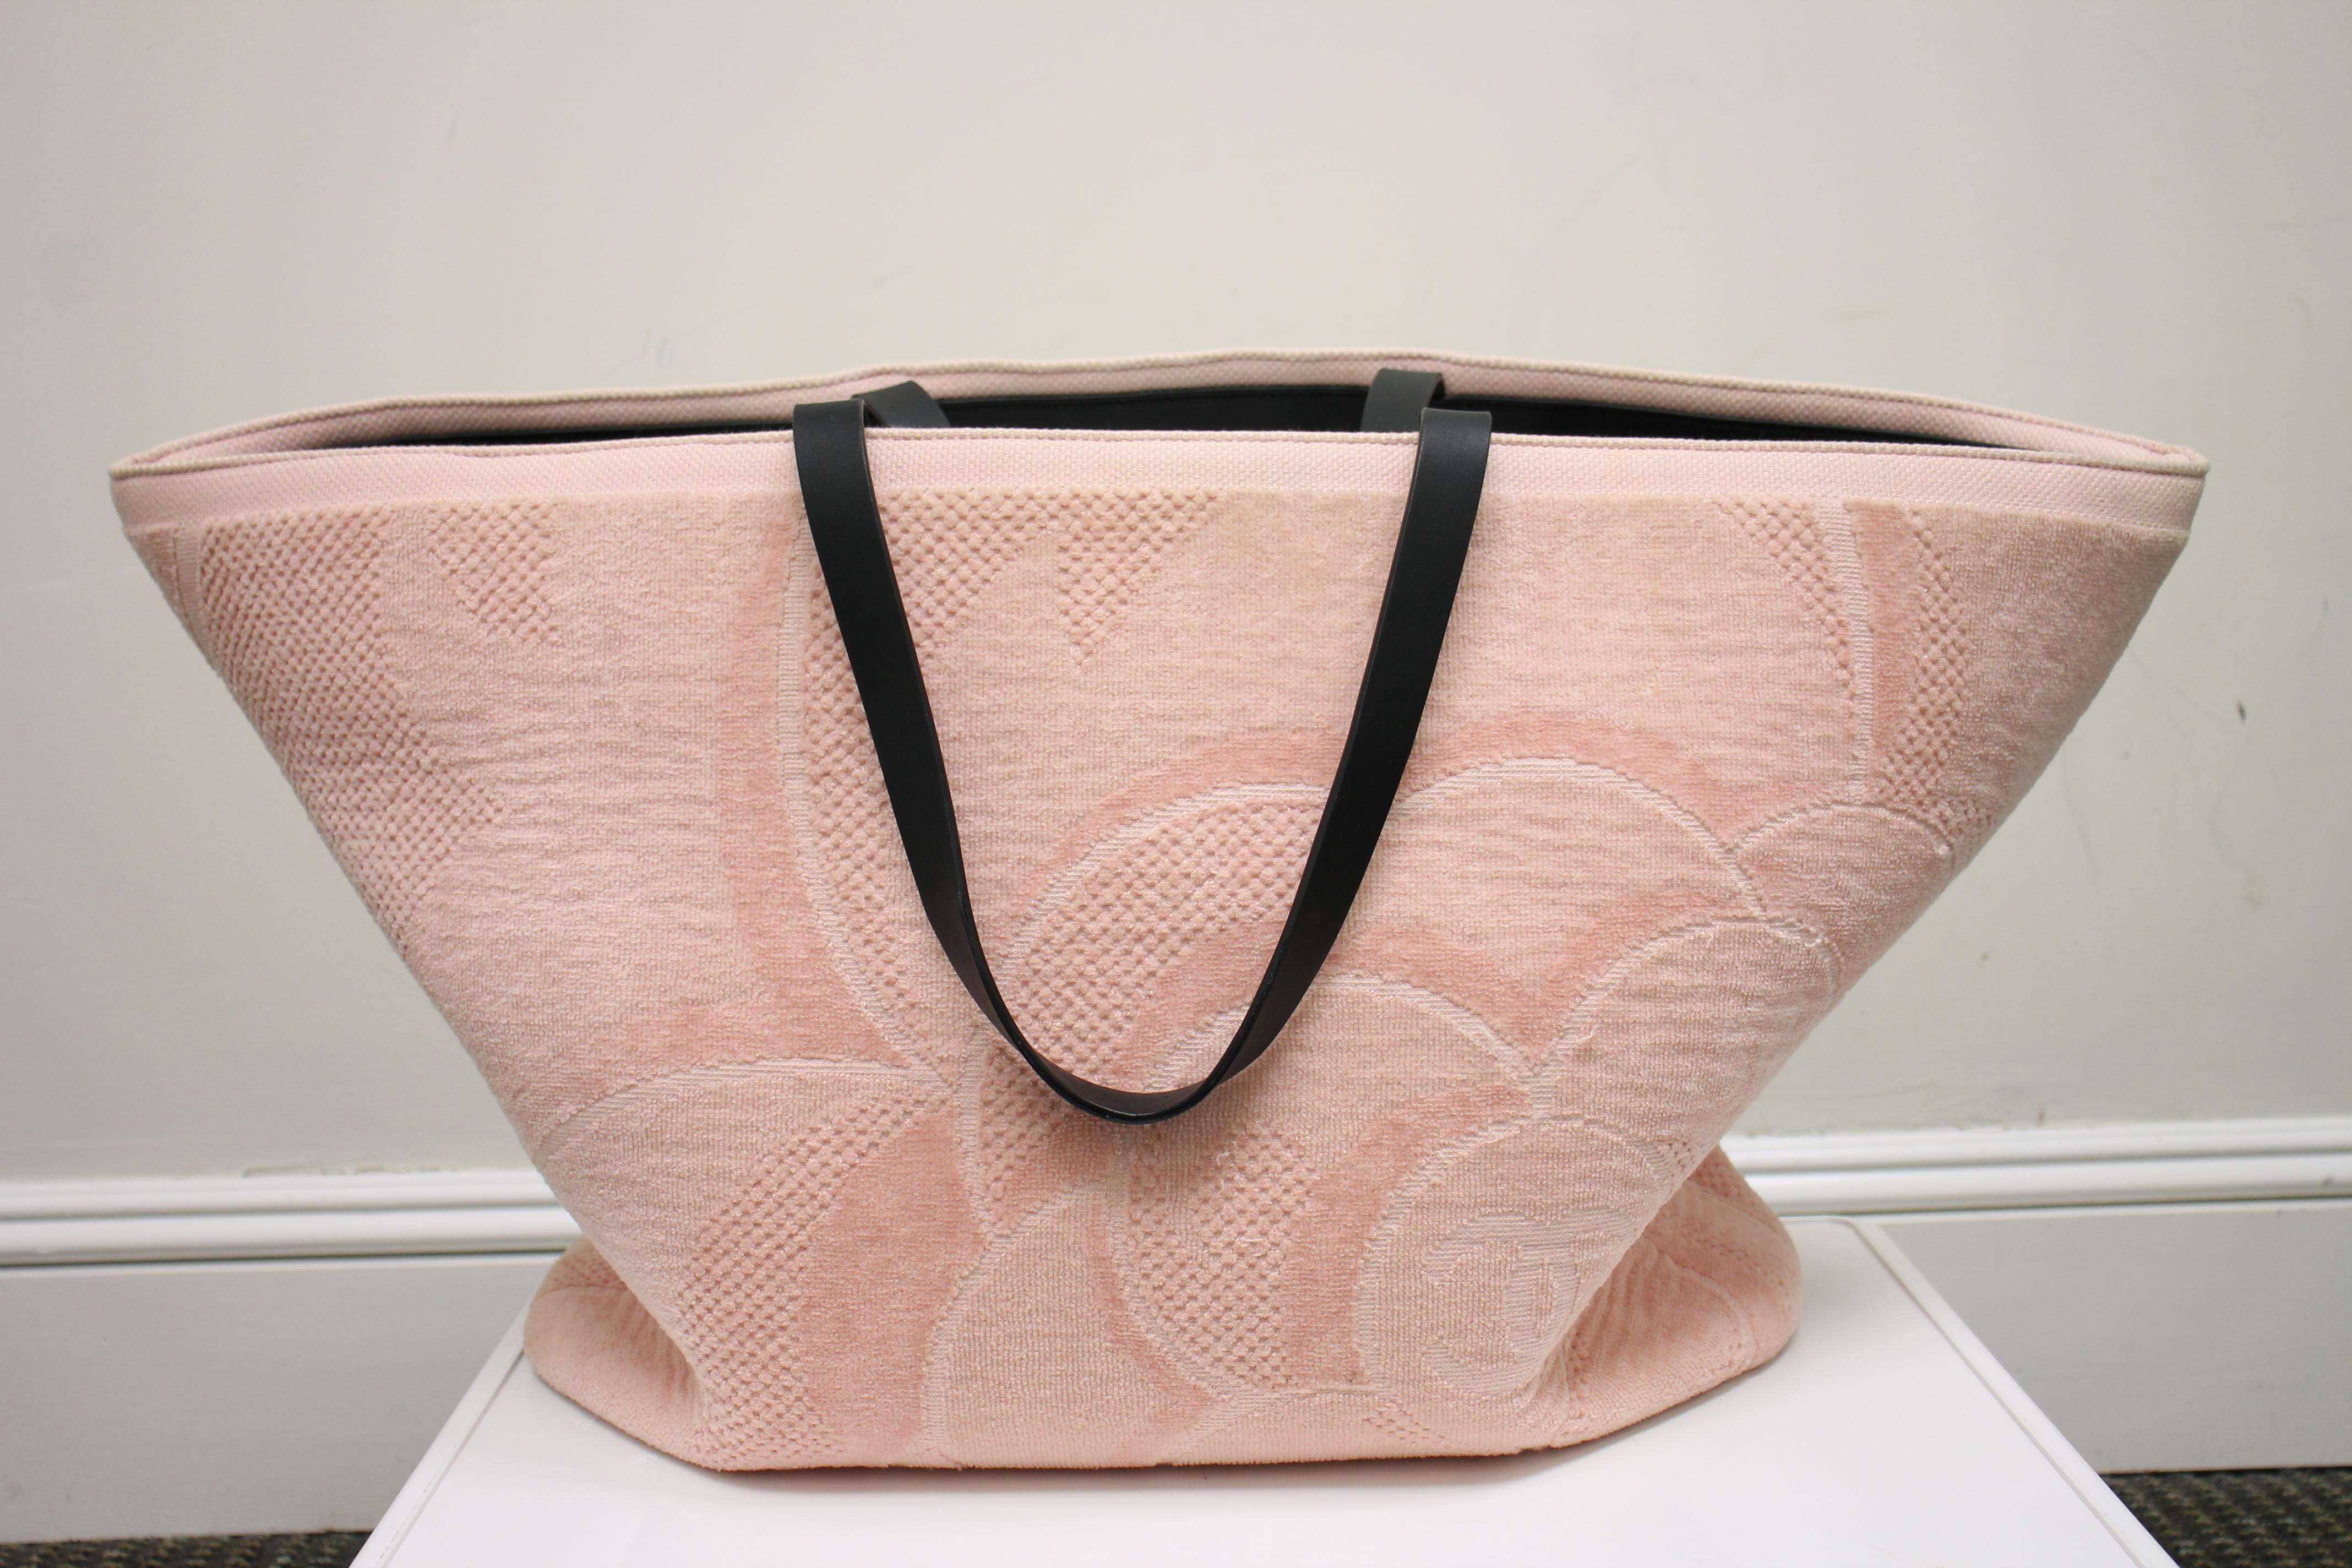 Chanel Terry Cloth Beach Tote Bag In Good Condition For Sale In Roslyn, NY